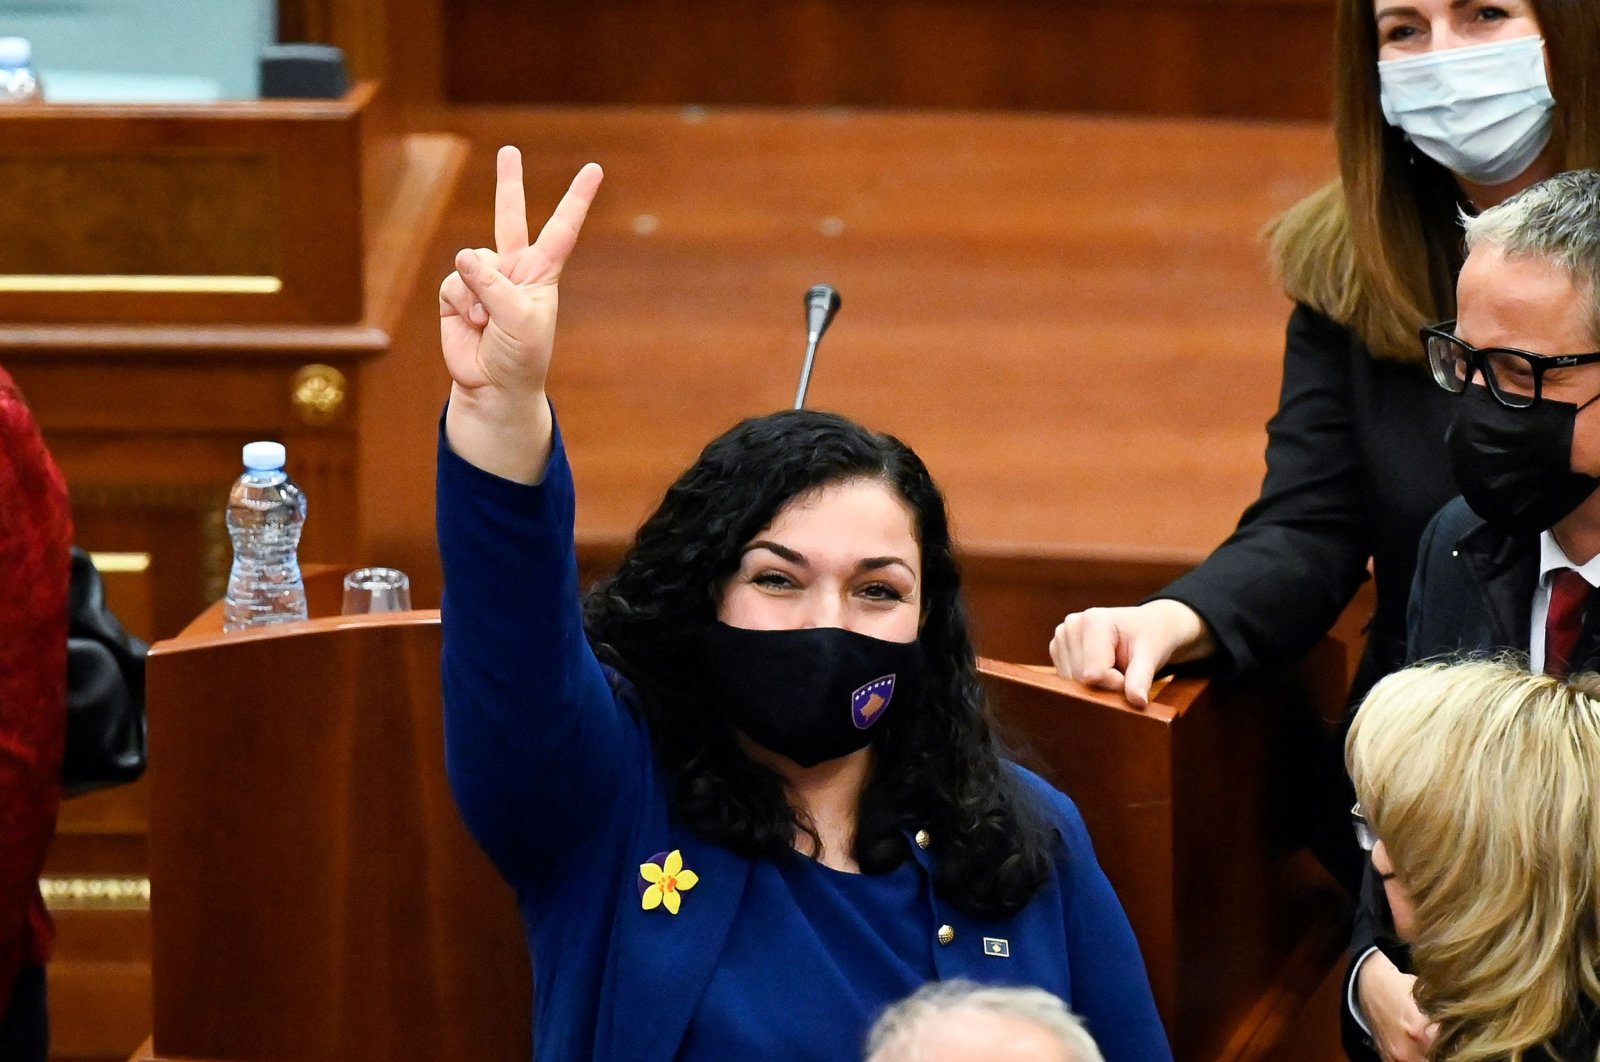 Newly elected President of Kosovo Vjosa Osmani reacts after being sworn in during a parliament session in Pristina, Kosovo, April 4, 2021. (Photo by Armend NIMANI / AFP)